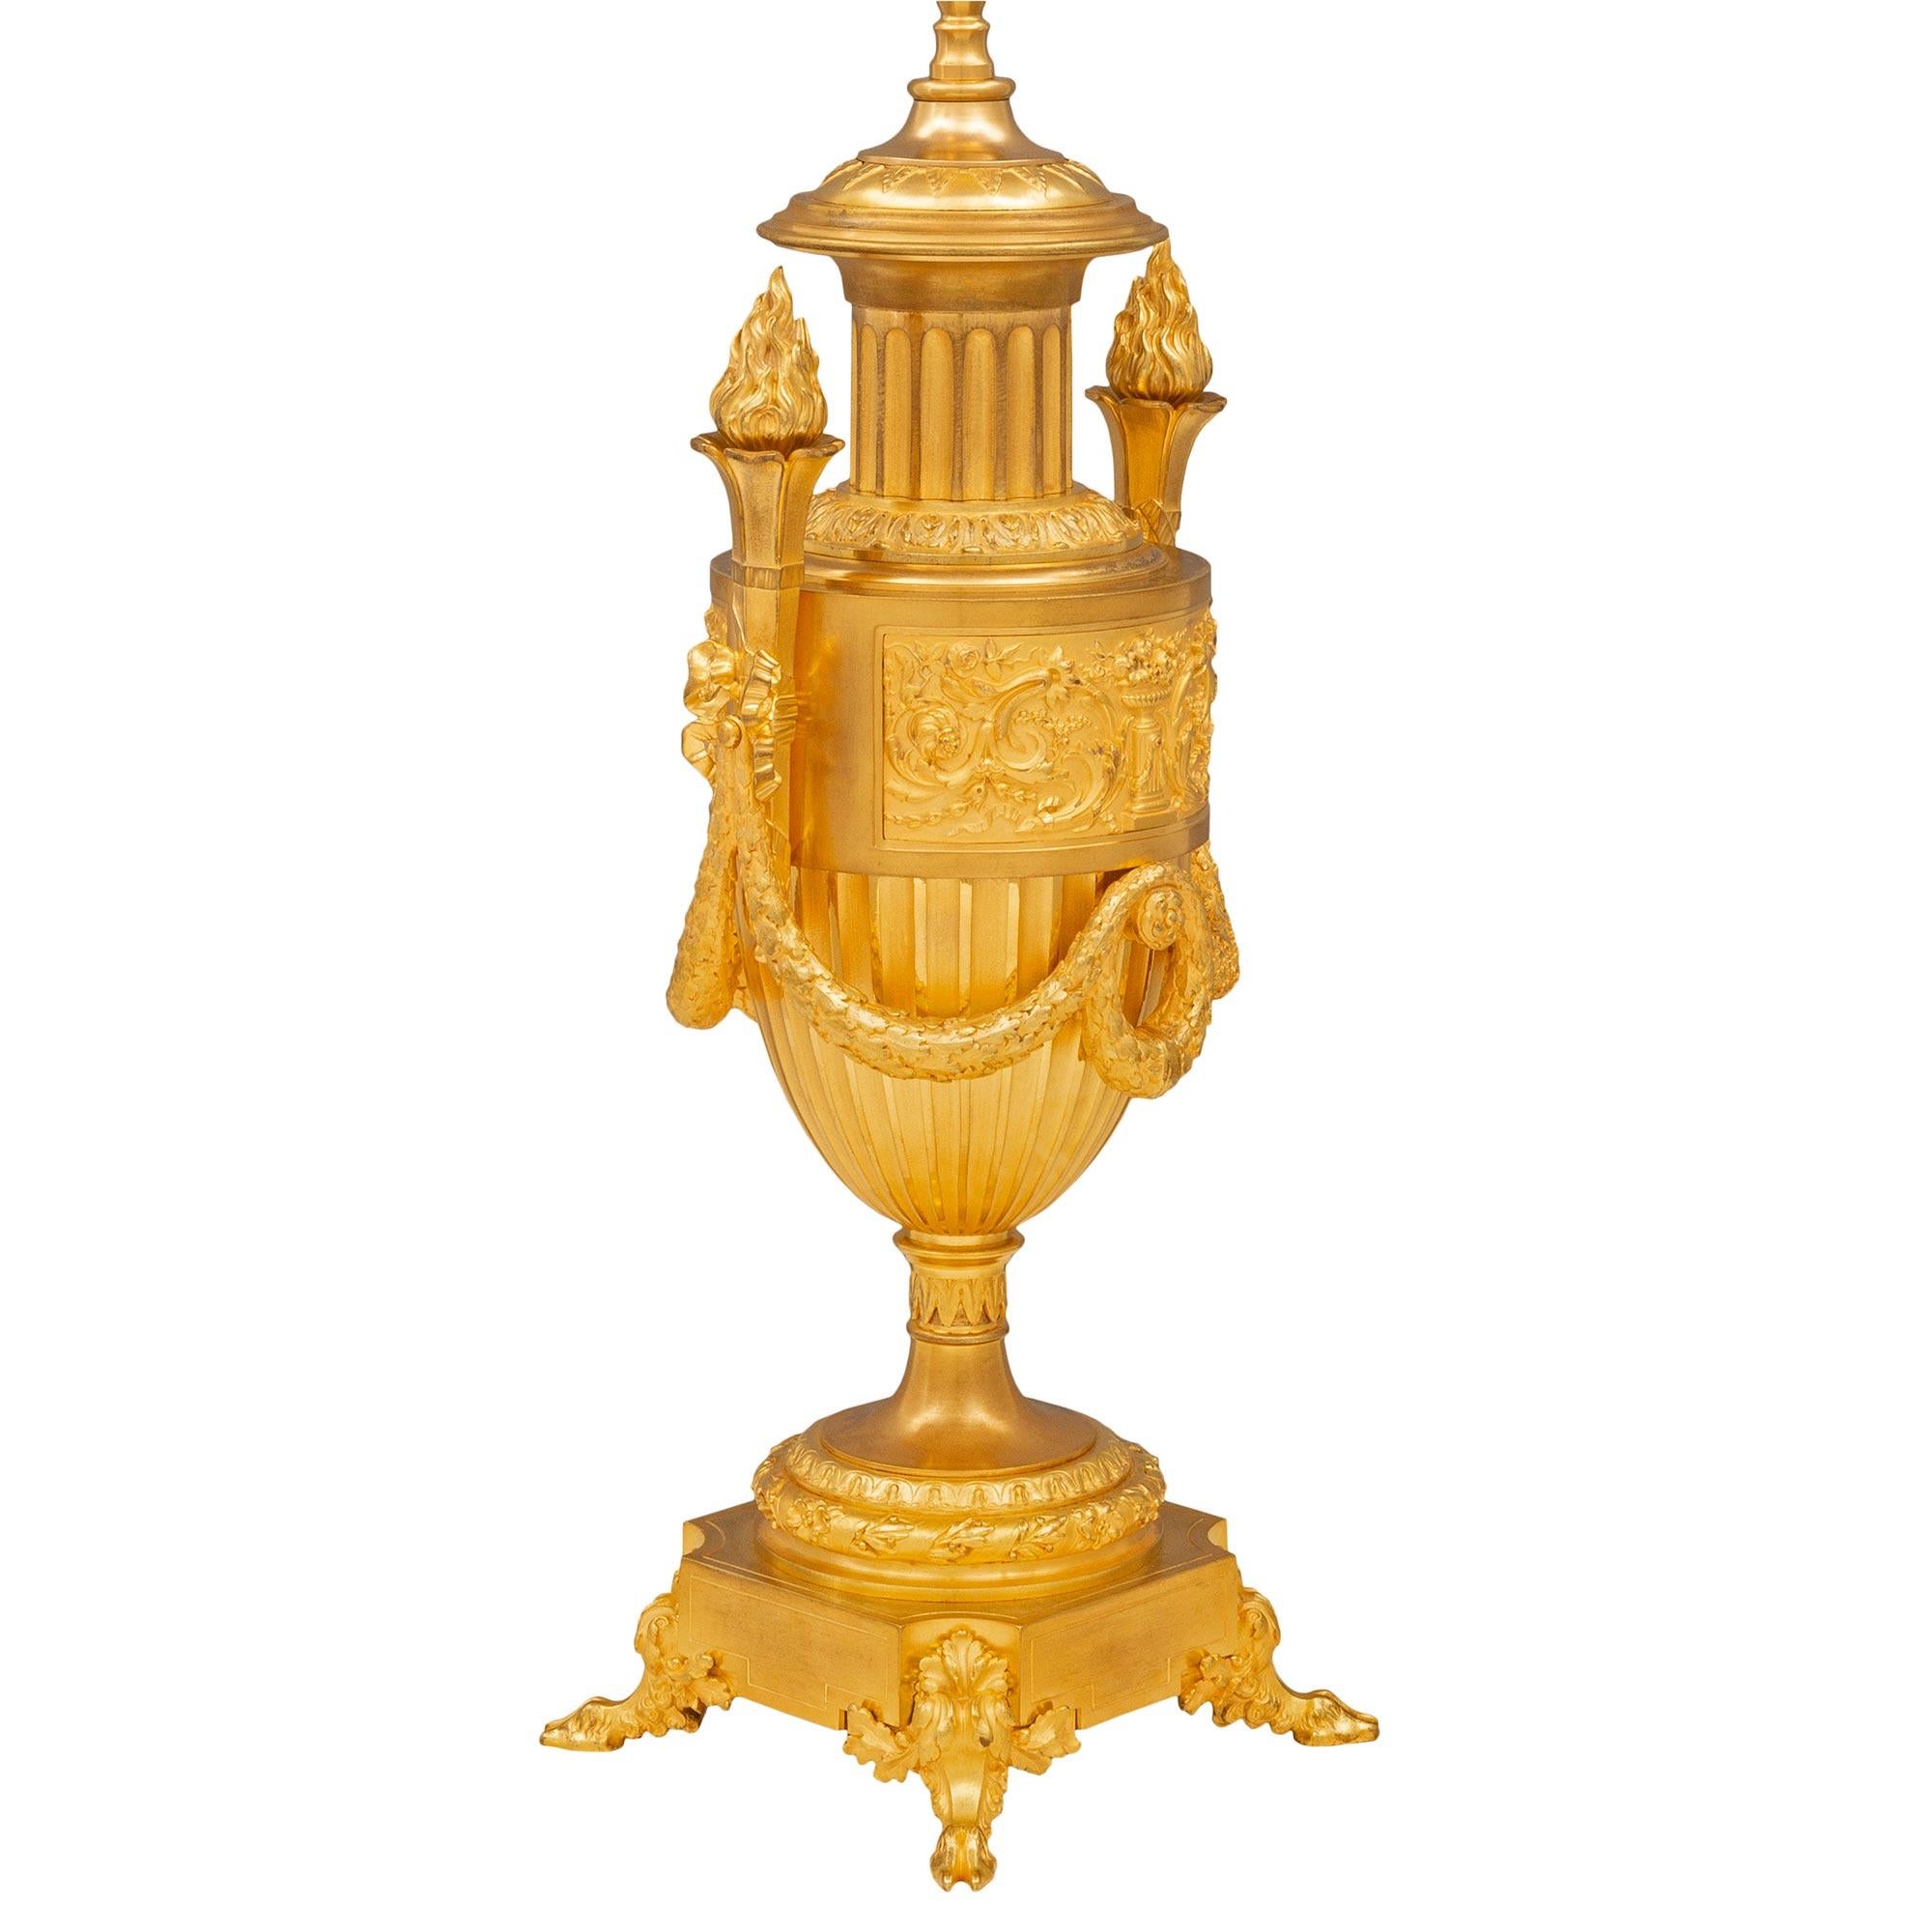 An exceptional French 19th century Louis XVI st. ormolu lamp. The lamp is raised by elegant hoof feet and acanthus leaf supports below the square base with concave corners. The socle shaped pedestal support displays a finely detailed wrap around